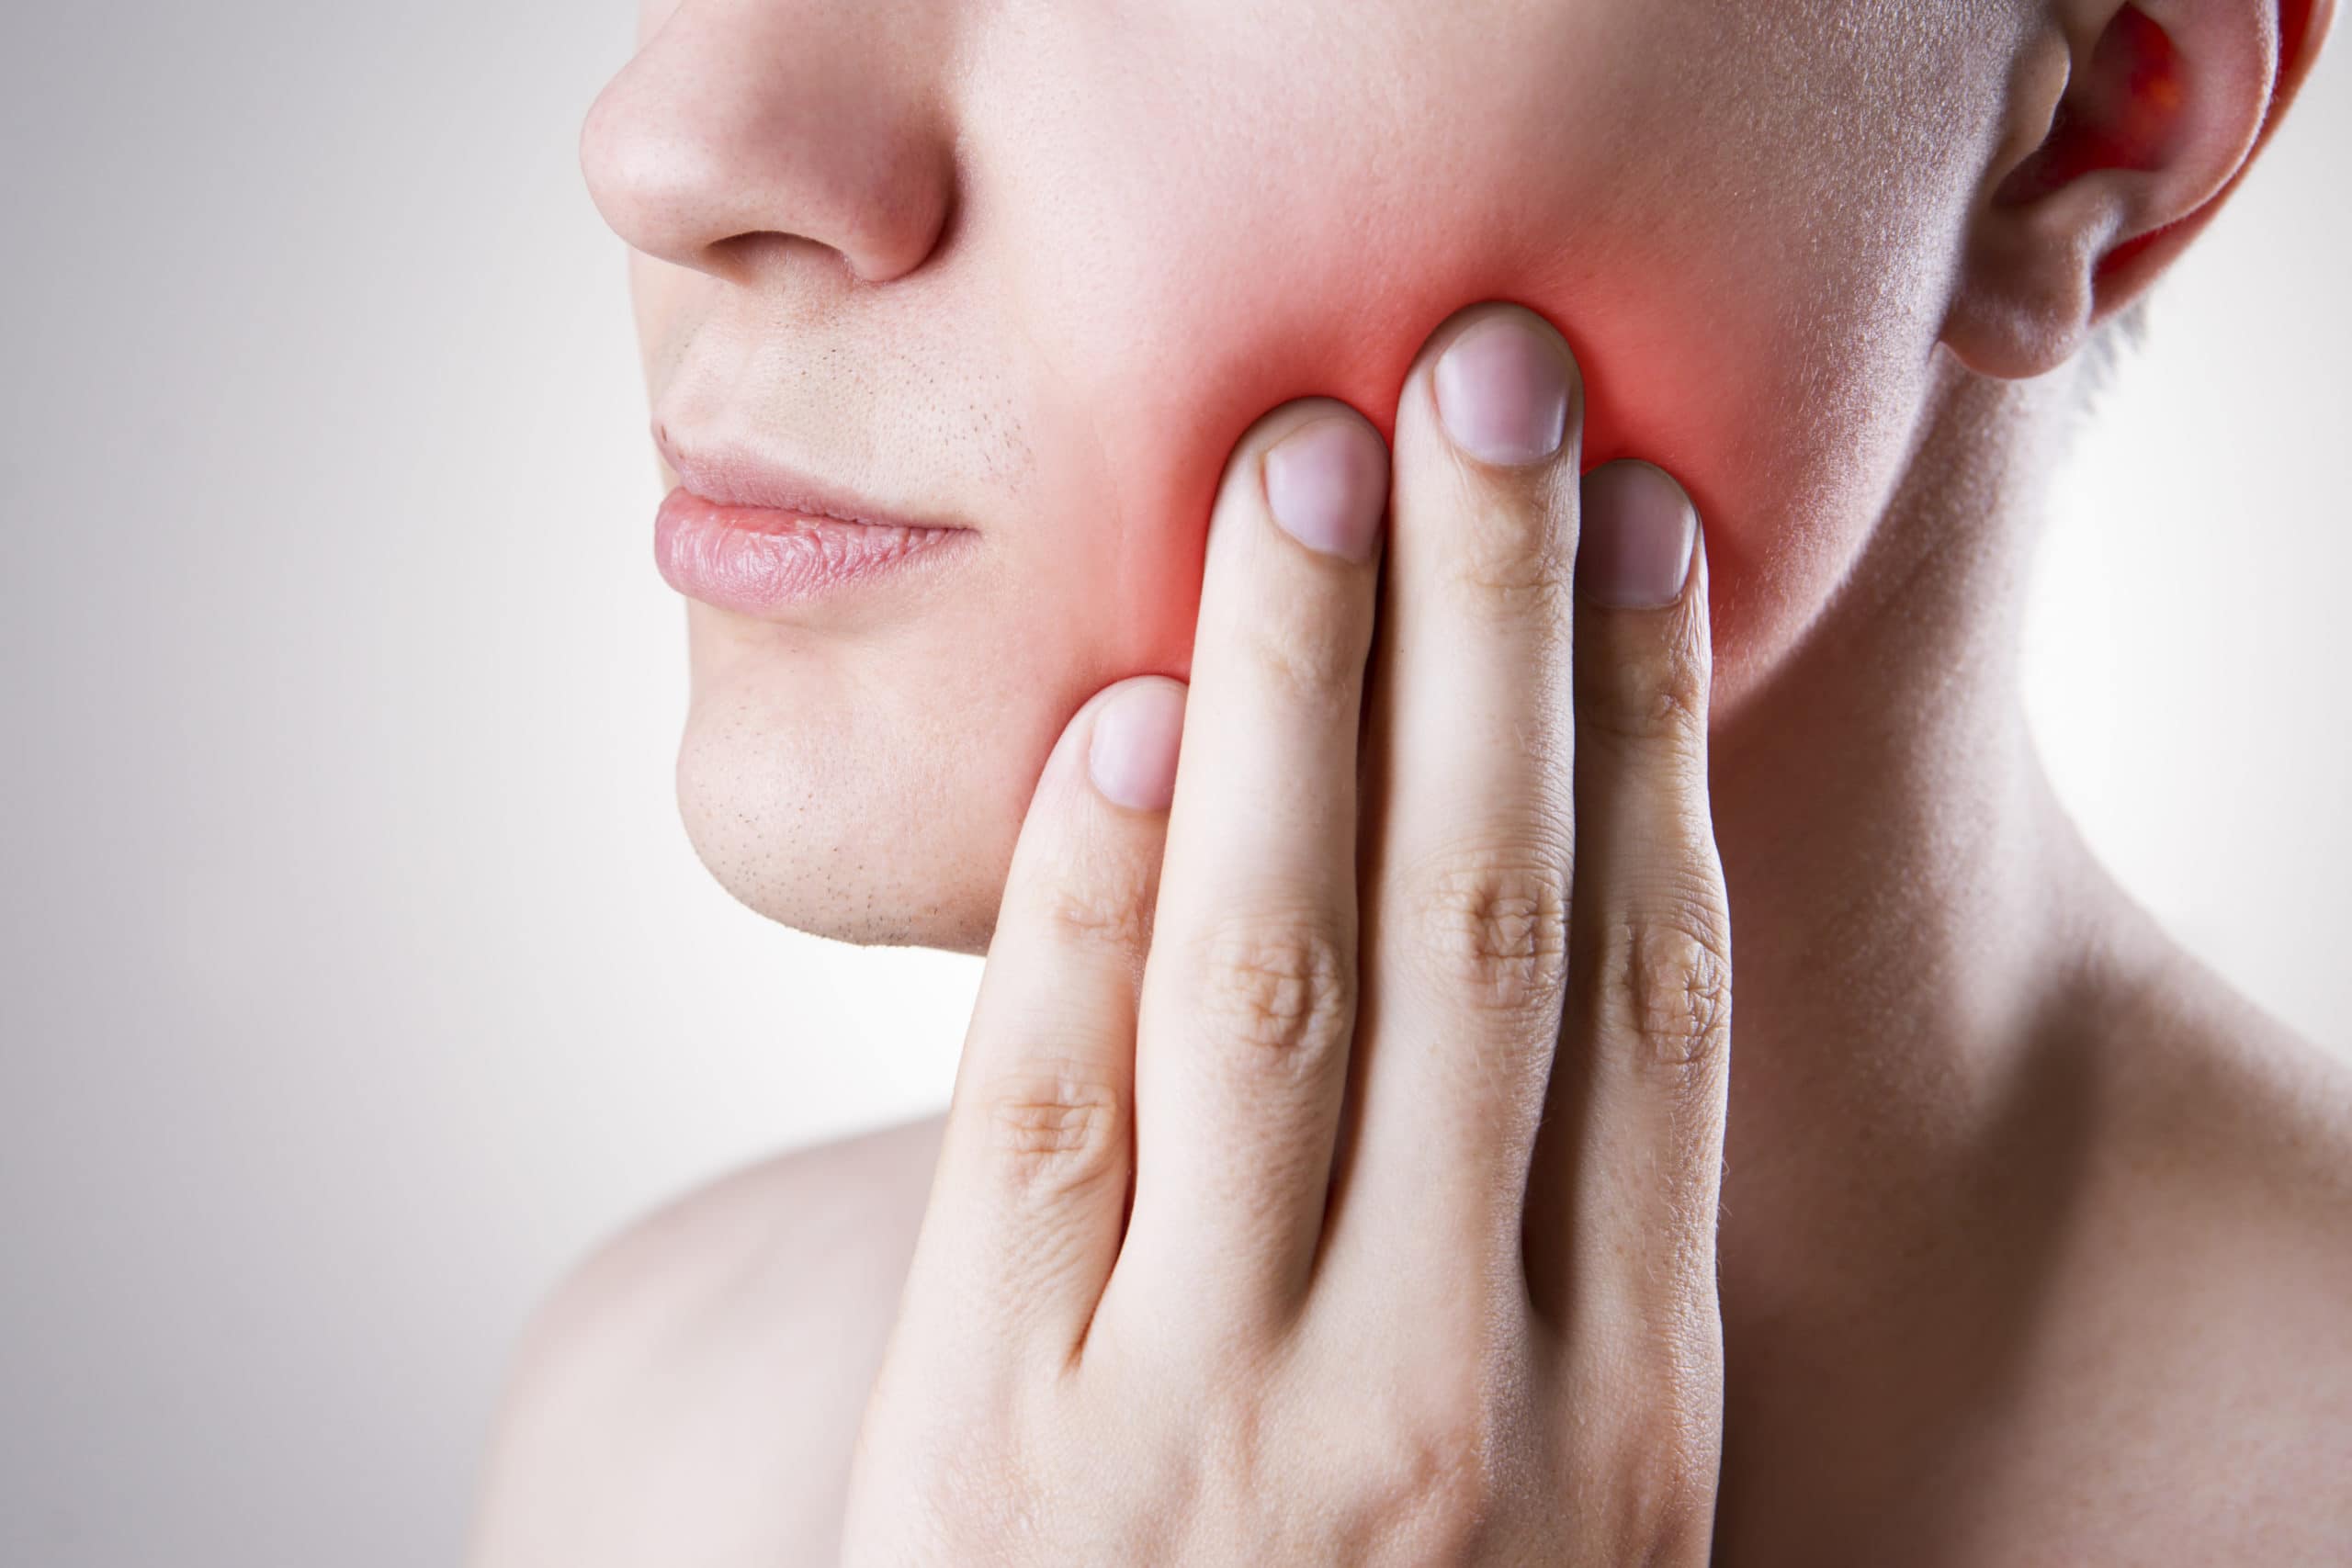 How Long Does Swelling Last After Wisdom Teeth Removal?